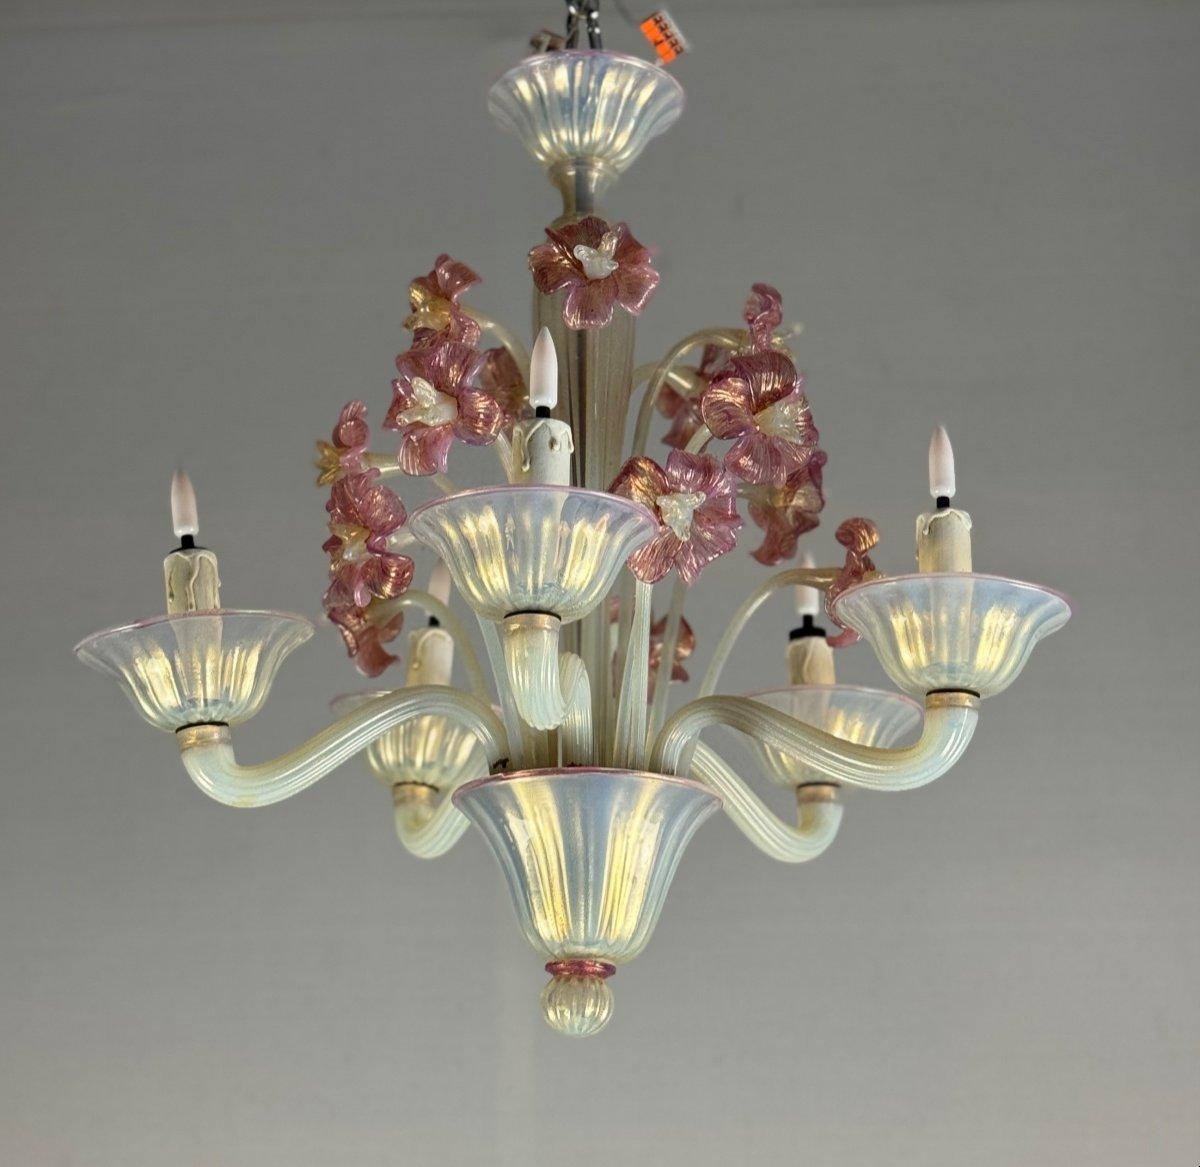 Venetian Chandelier, In Blue And Red Murano Glass, 

Five Arms Of Light, 

Circa 1950